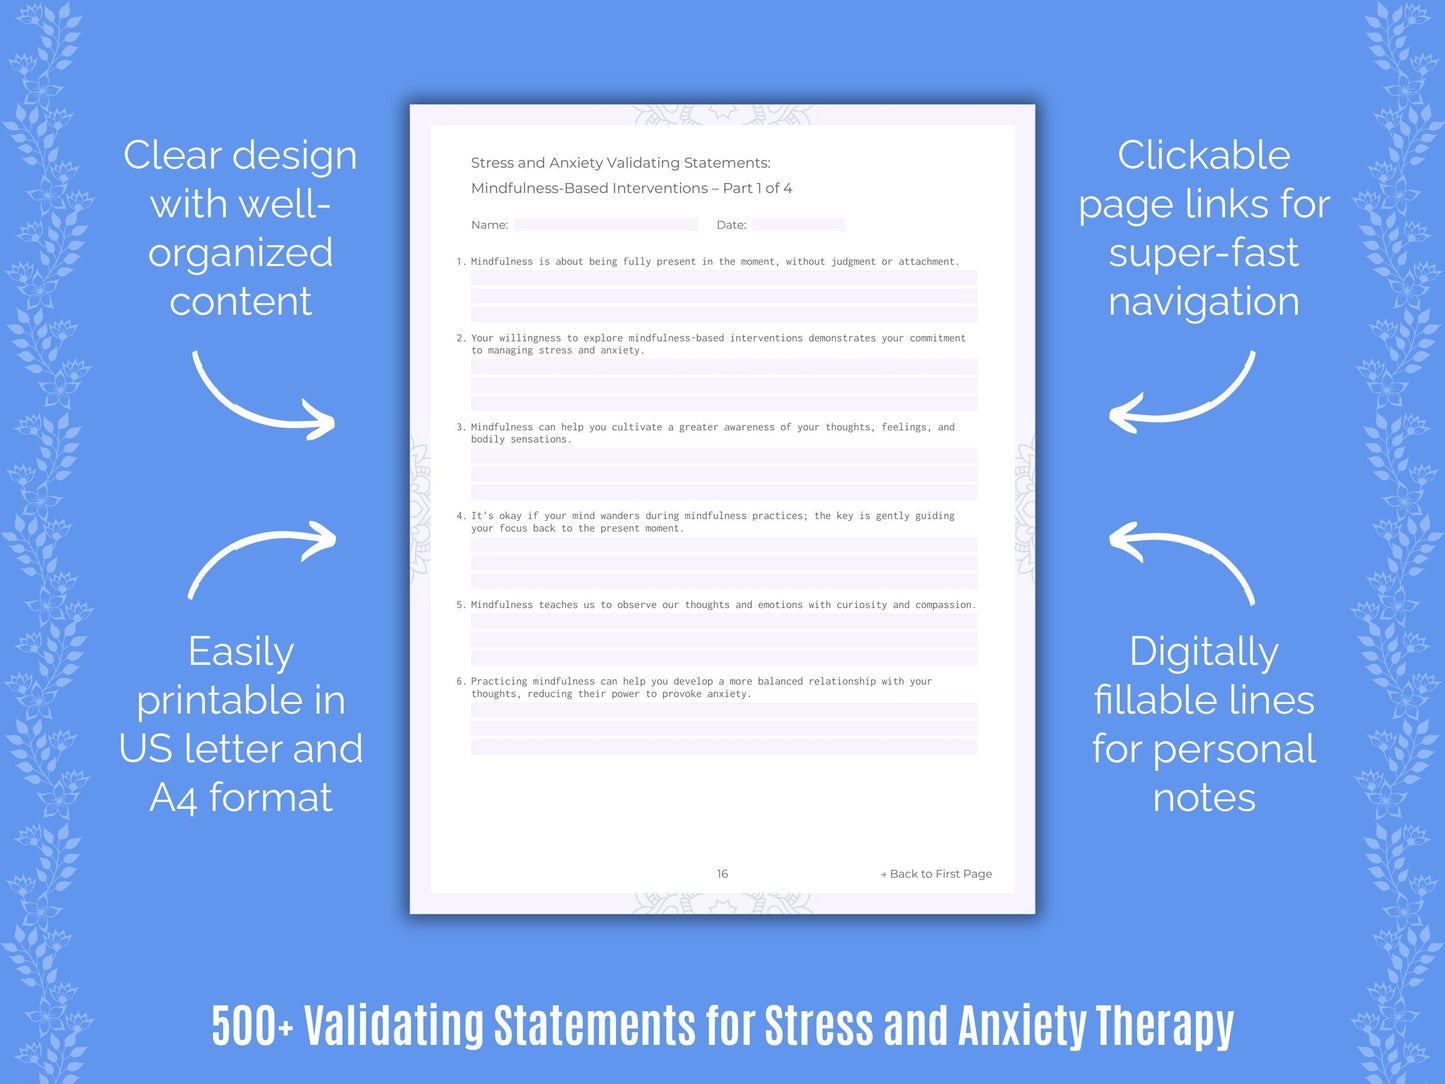 Stress and Anxiety Validating Therapy Statements Resource